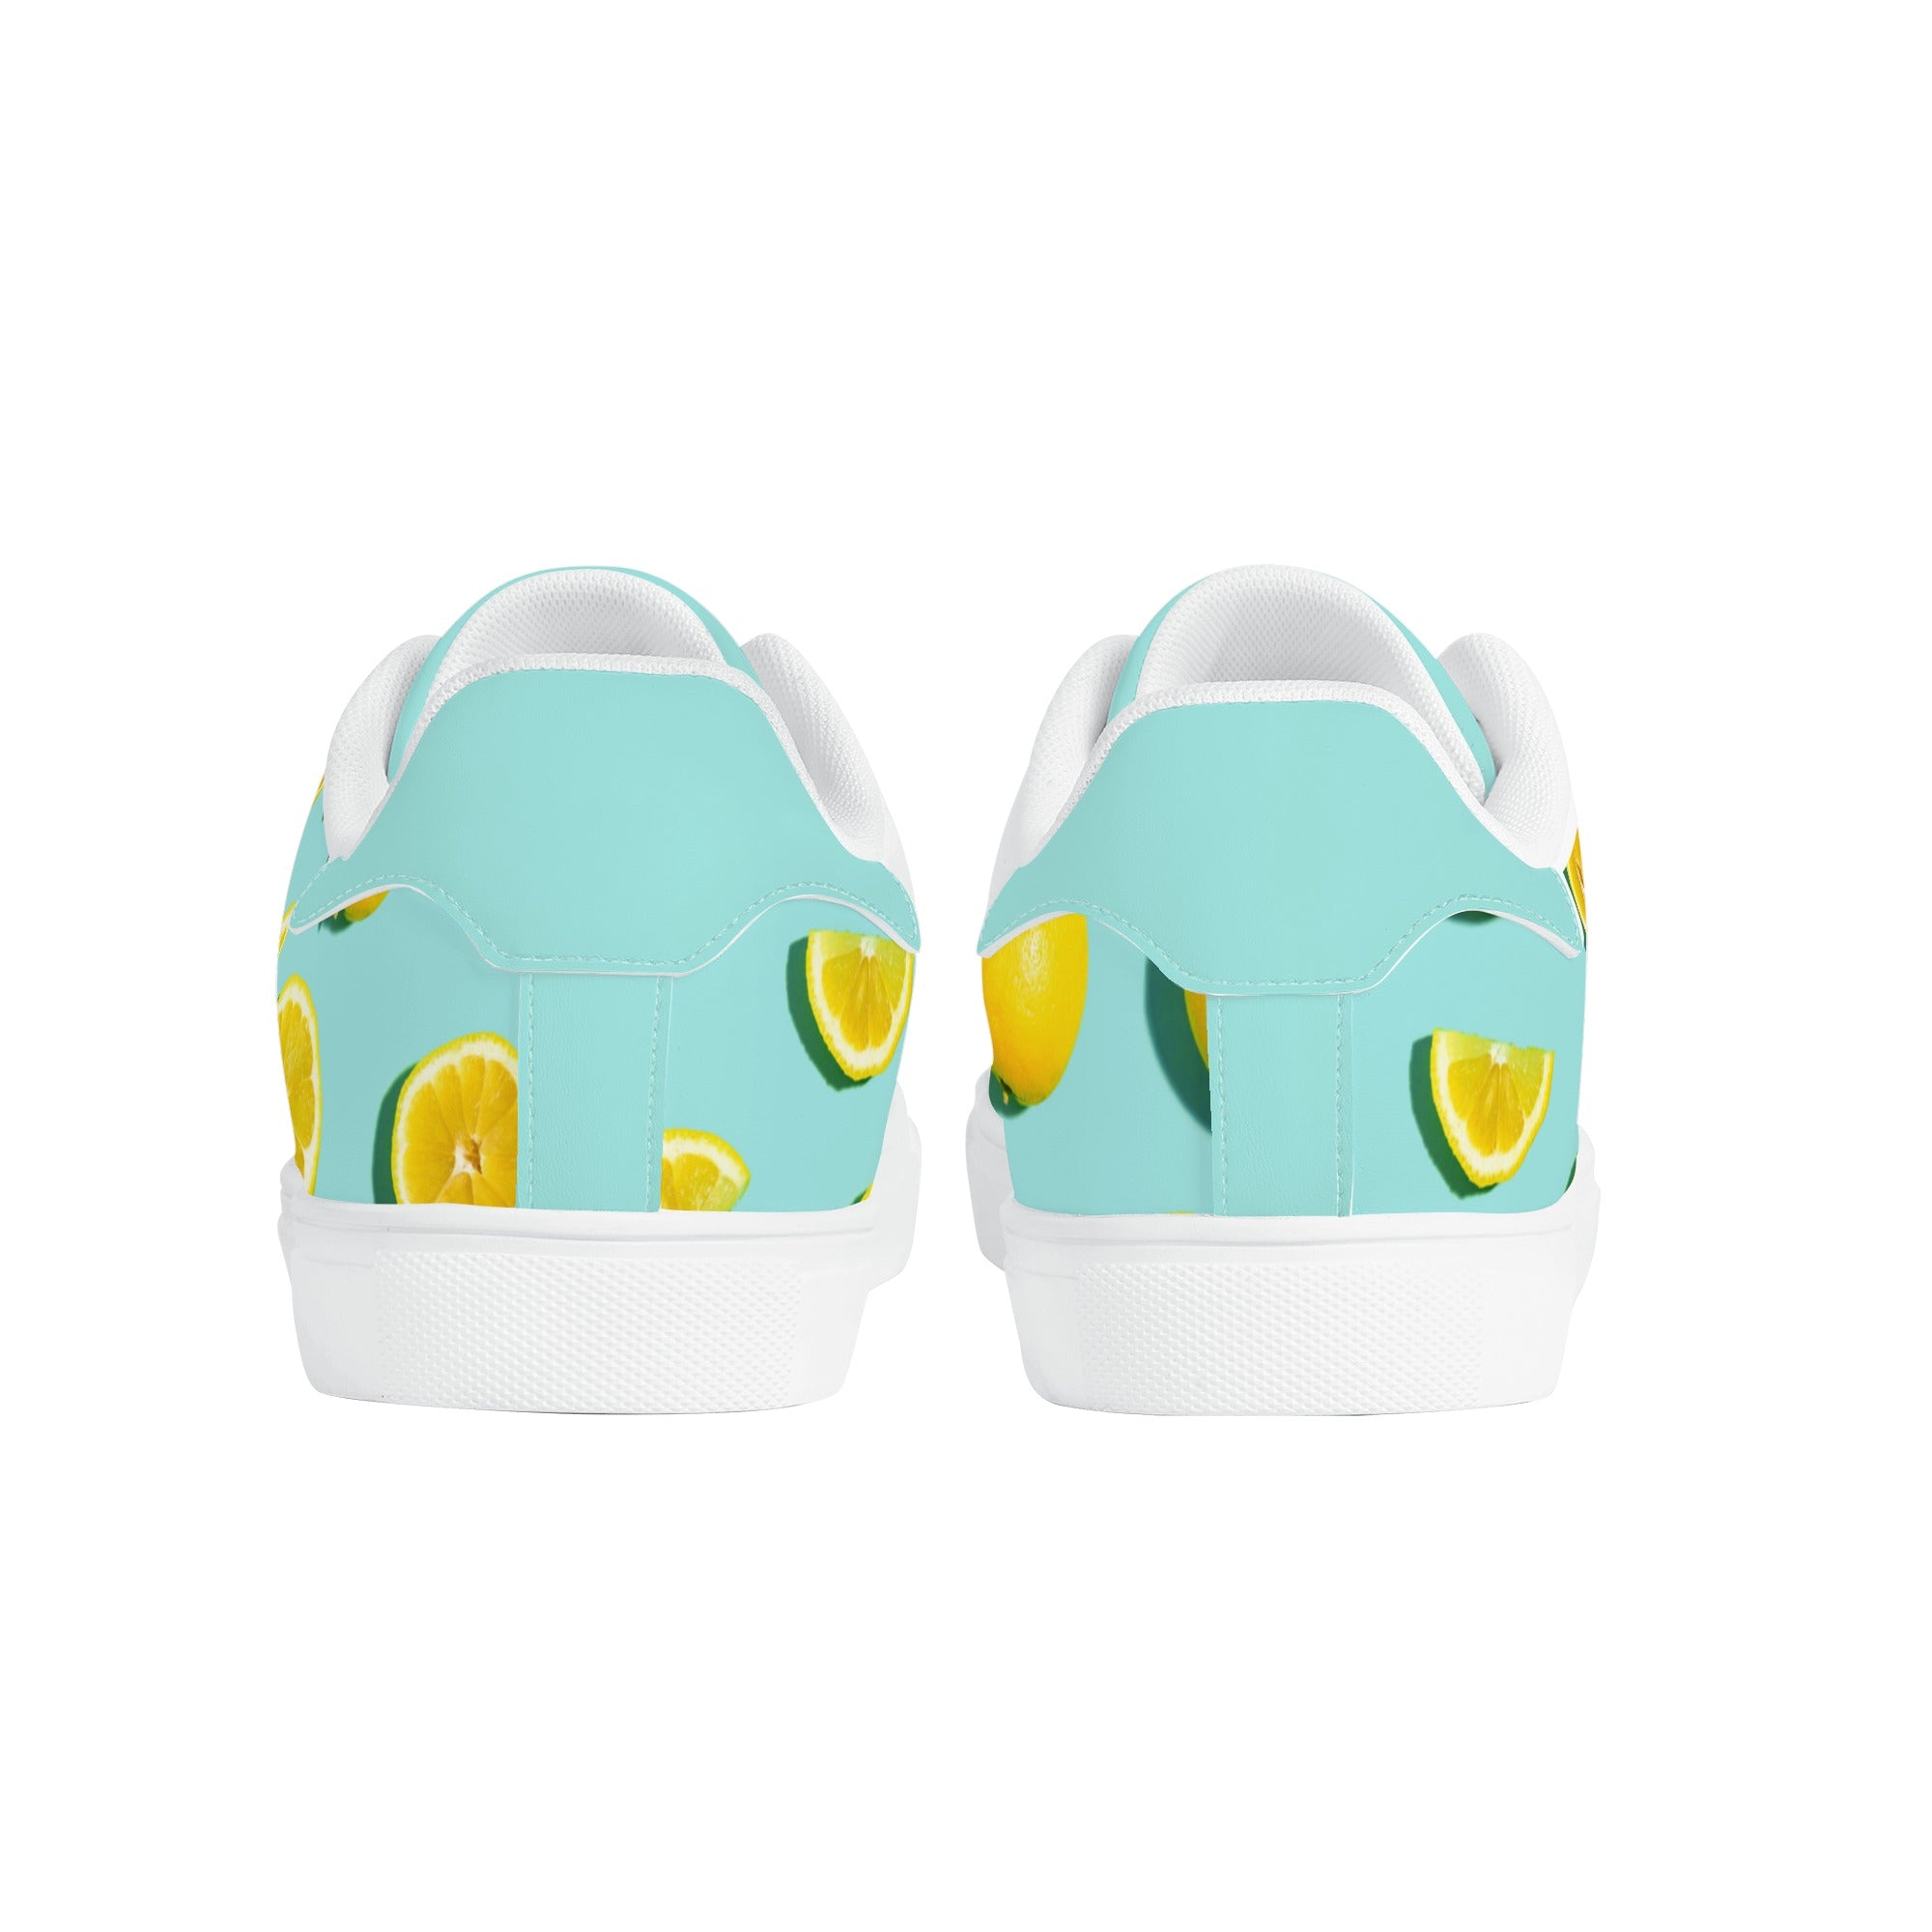 Collectable Lemon Shoes | Fruit Themed Customized Sneakers | Shoe Zero